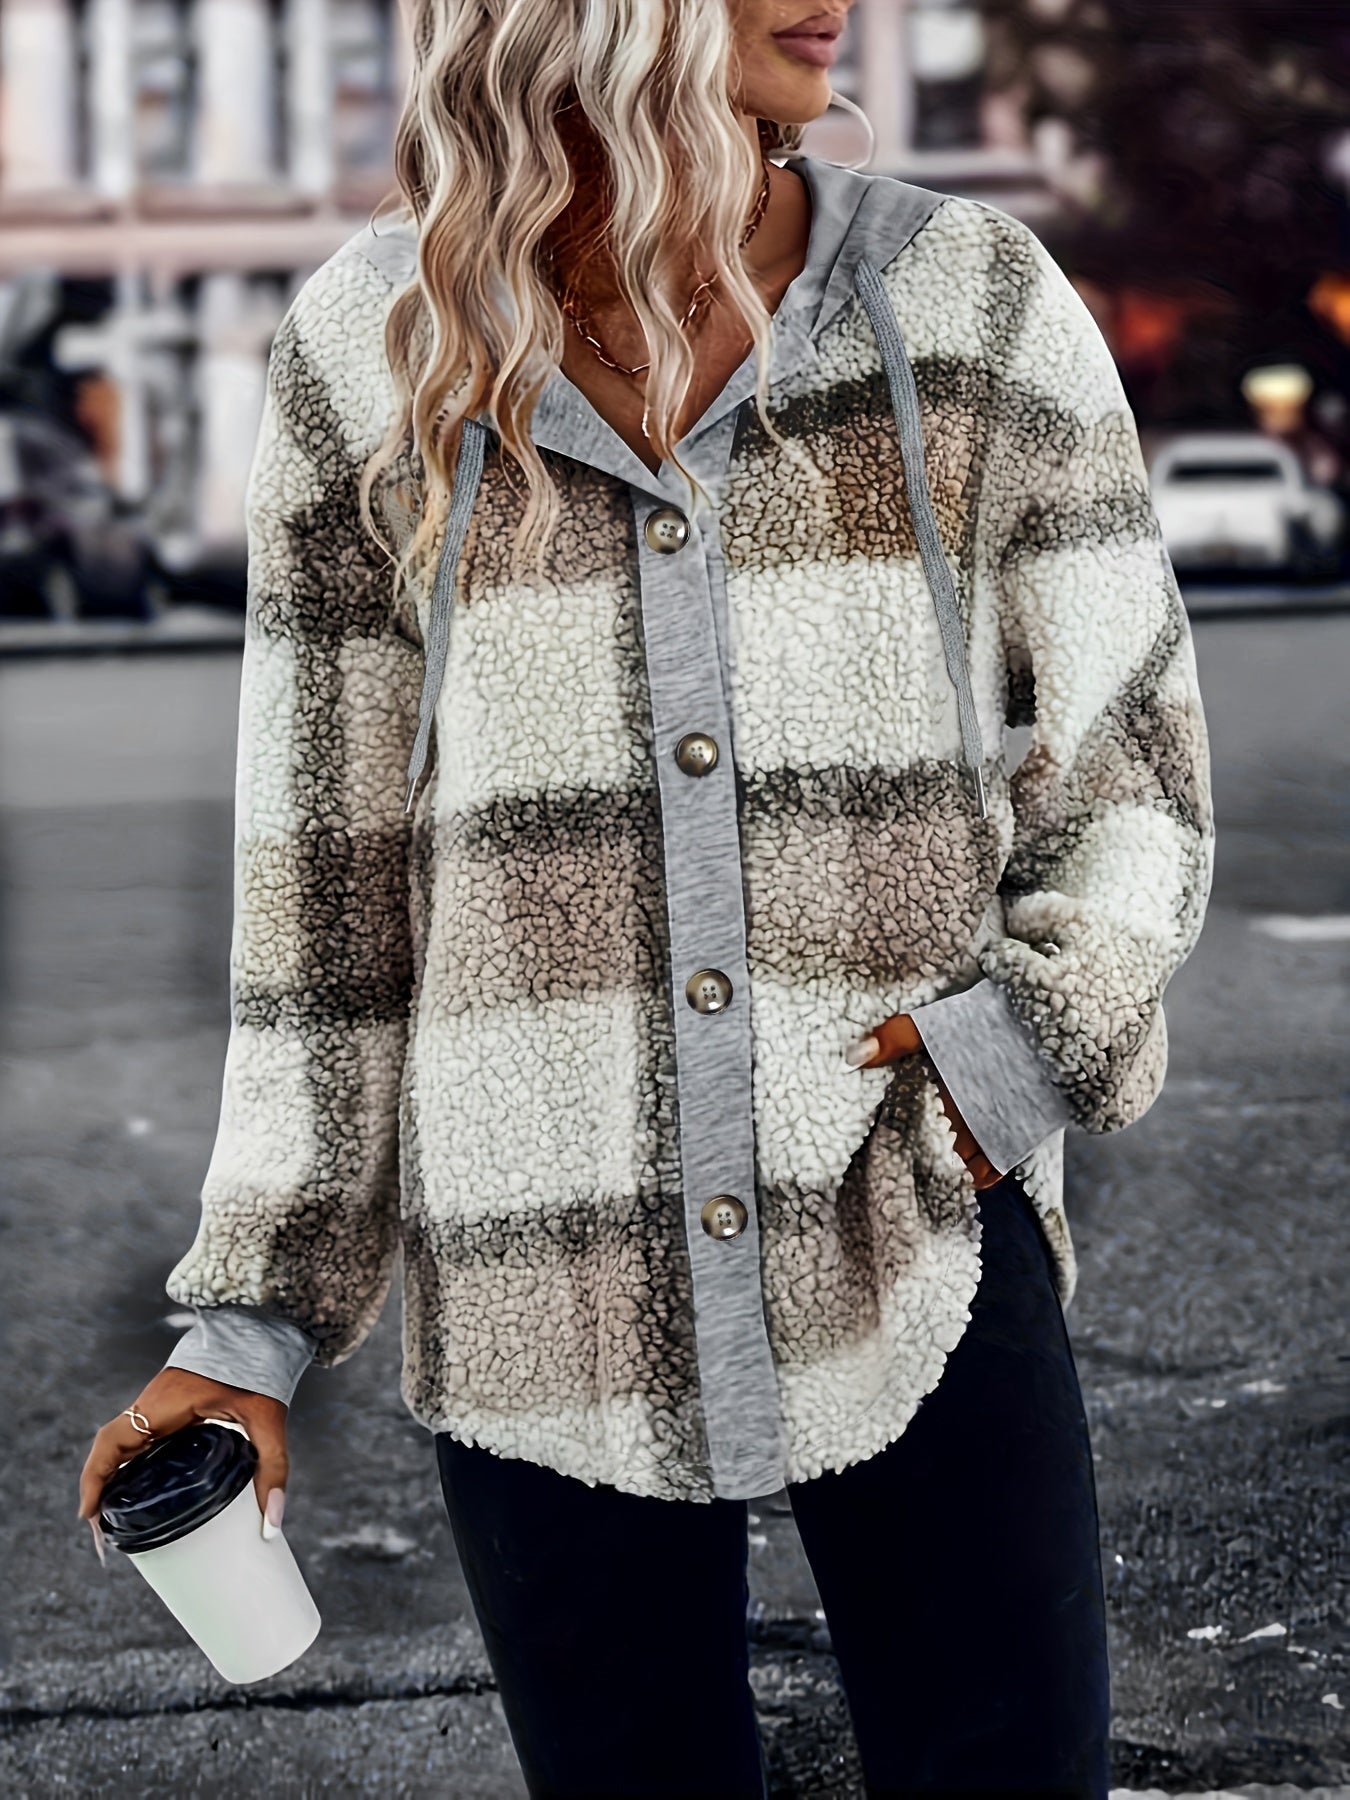 Antmvs Plaid Pattern Hooded Coat, Casual Button Front Drawstring Long Sleeve Outerwear, Women's Clothing